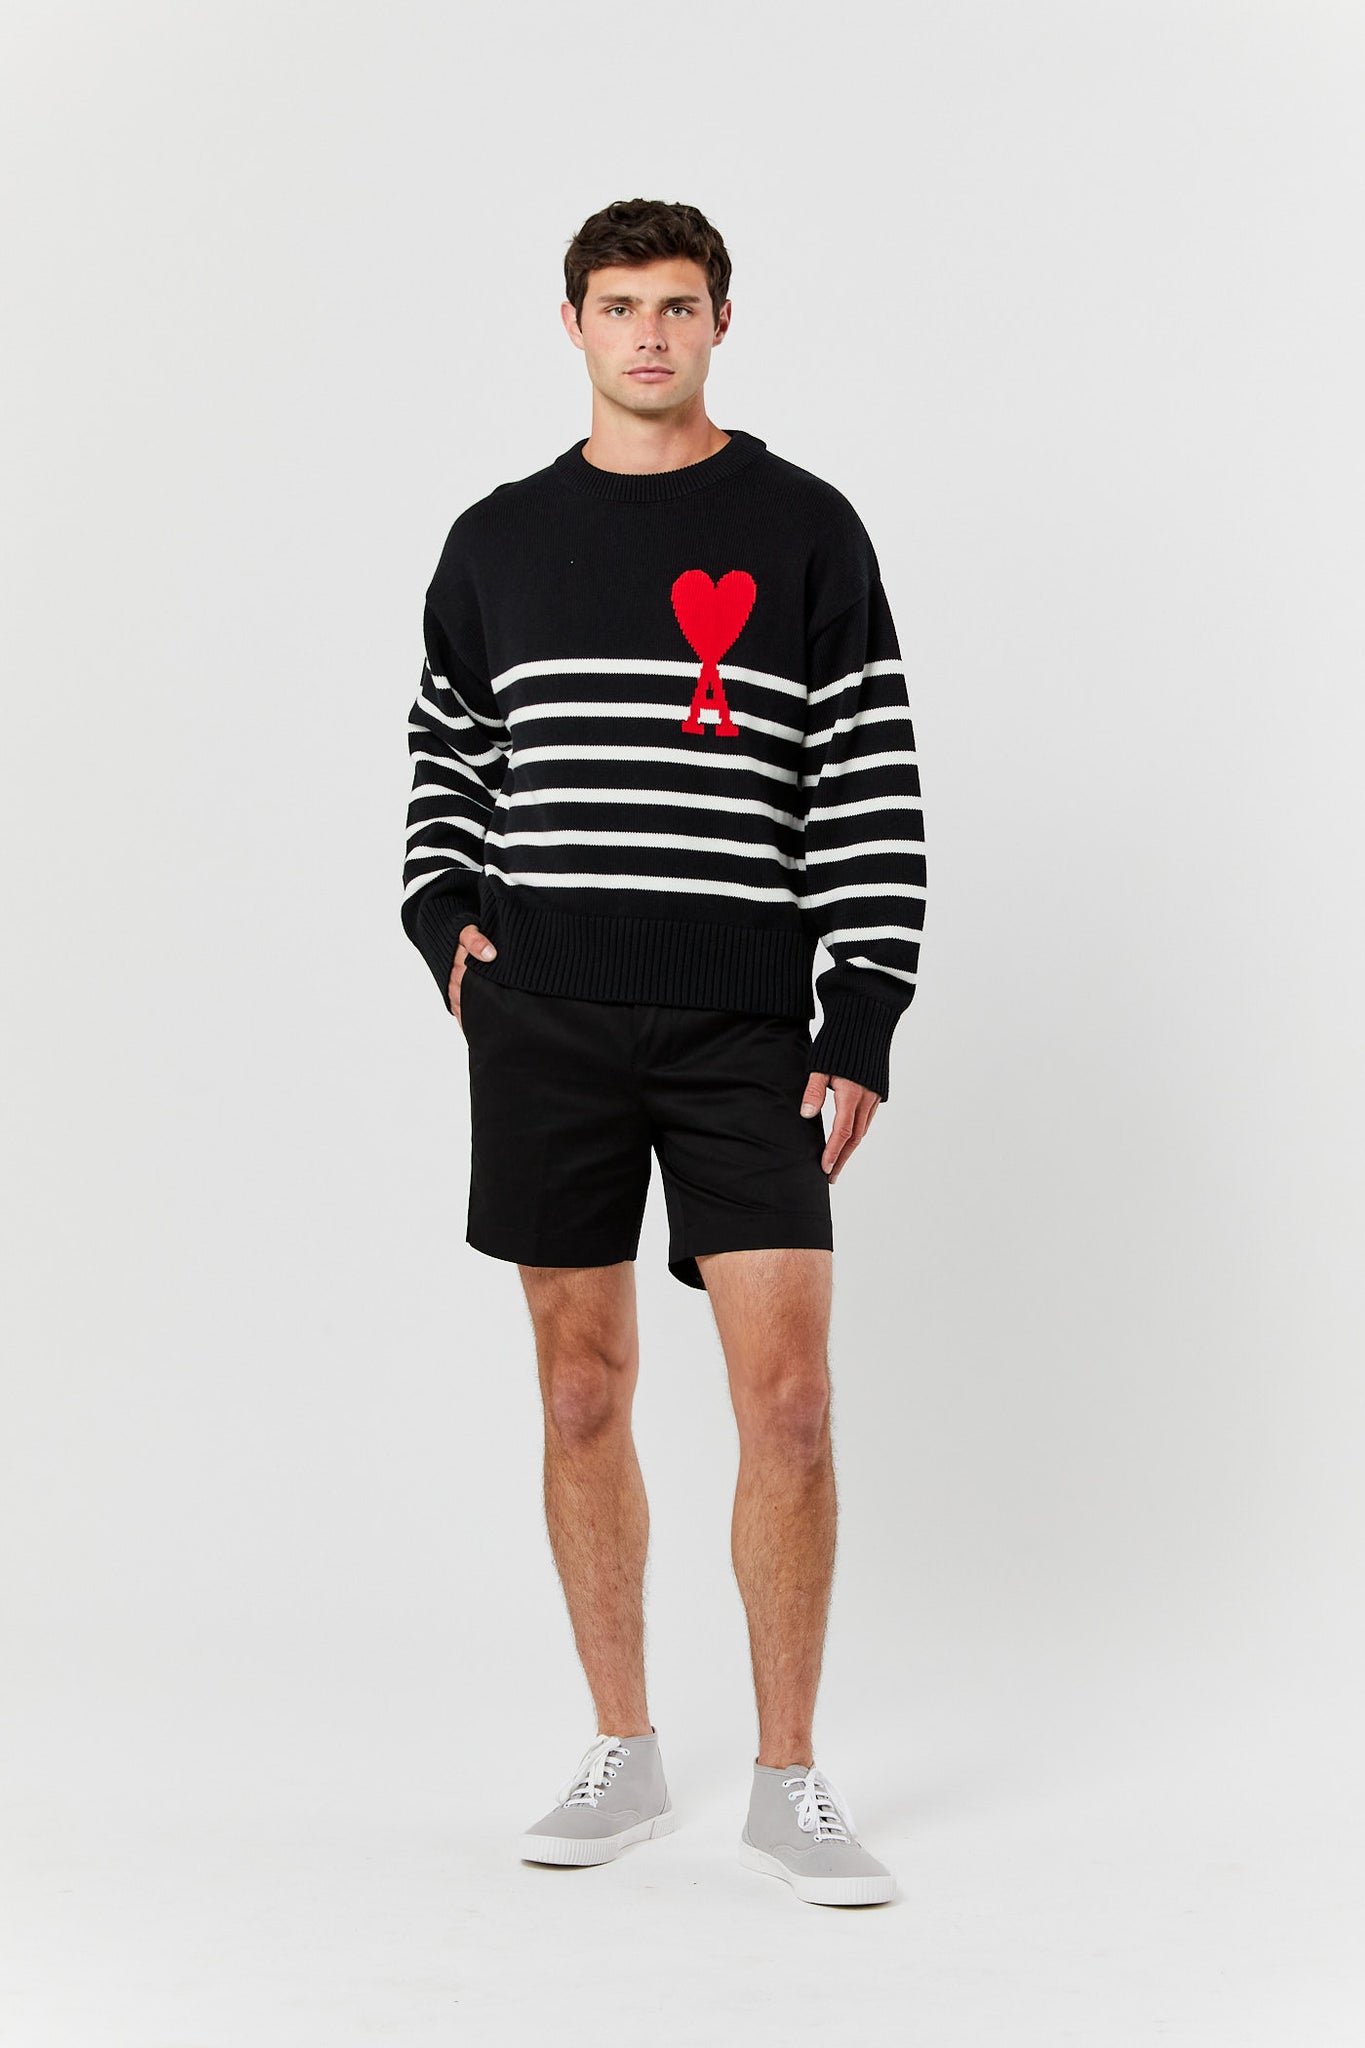 Black and White Adc Striped Sweater